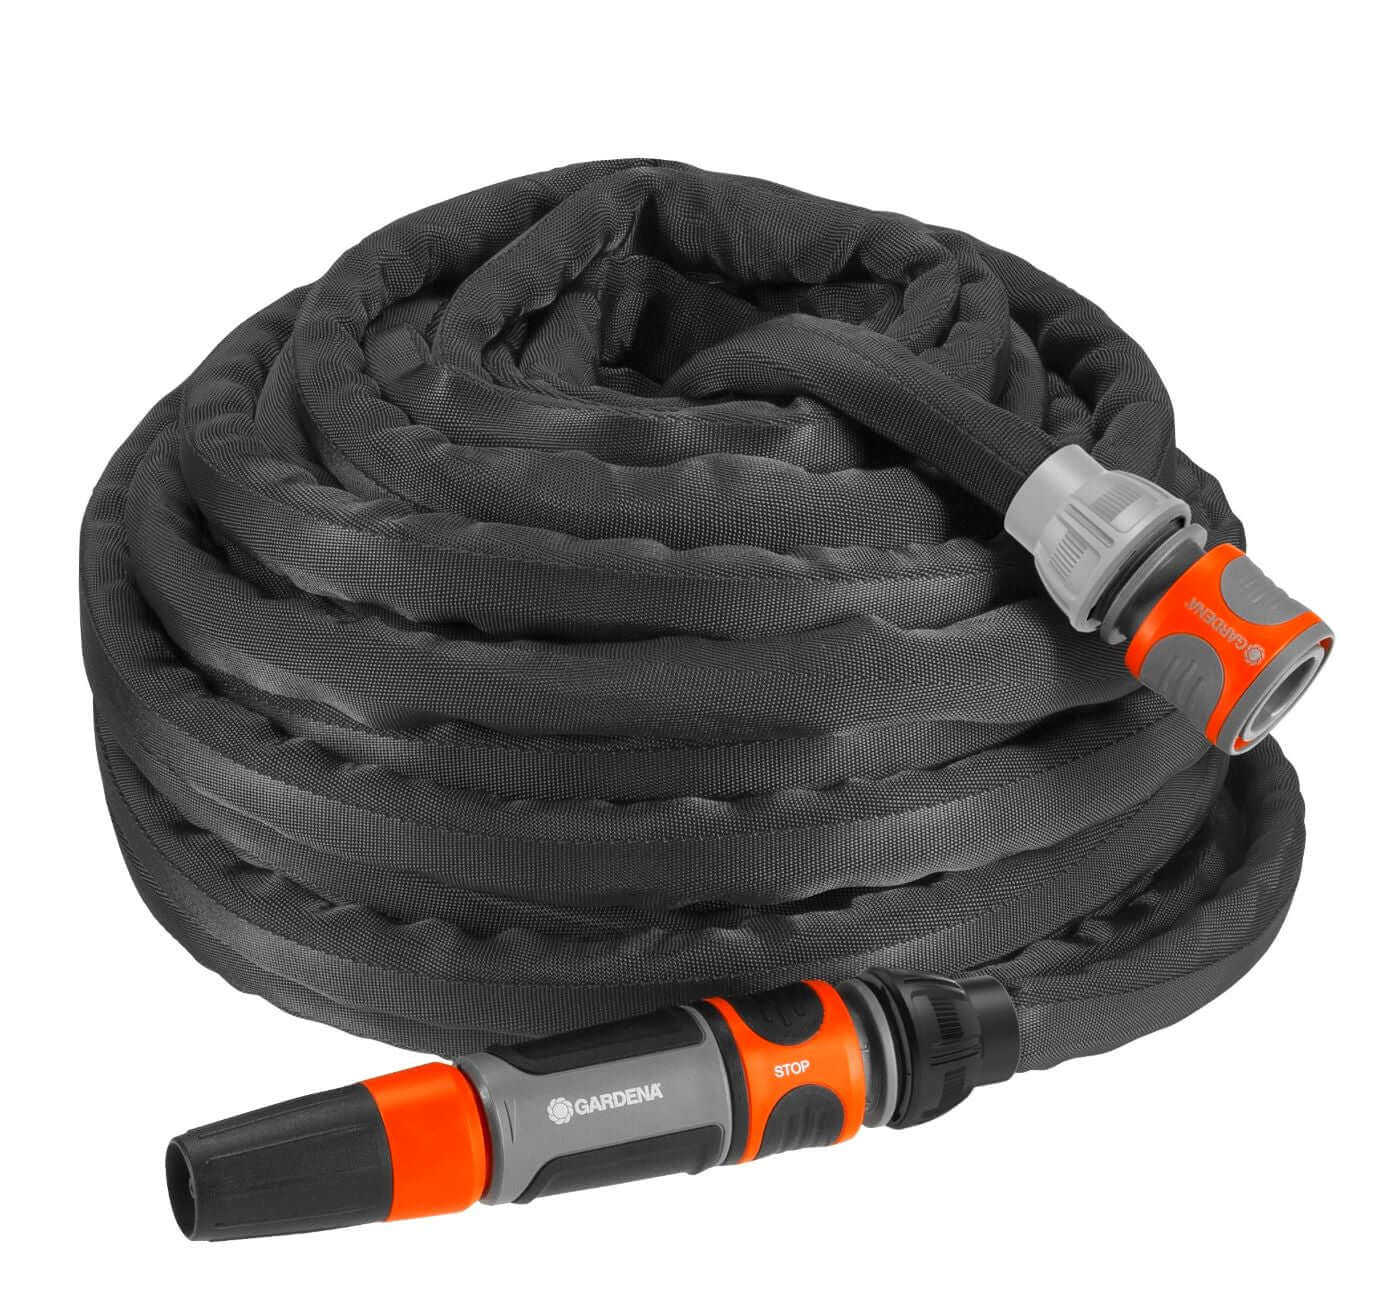 What is Gardena Liano textile hose and how is it different from a standard garden hose pipe